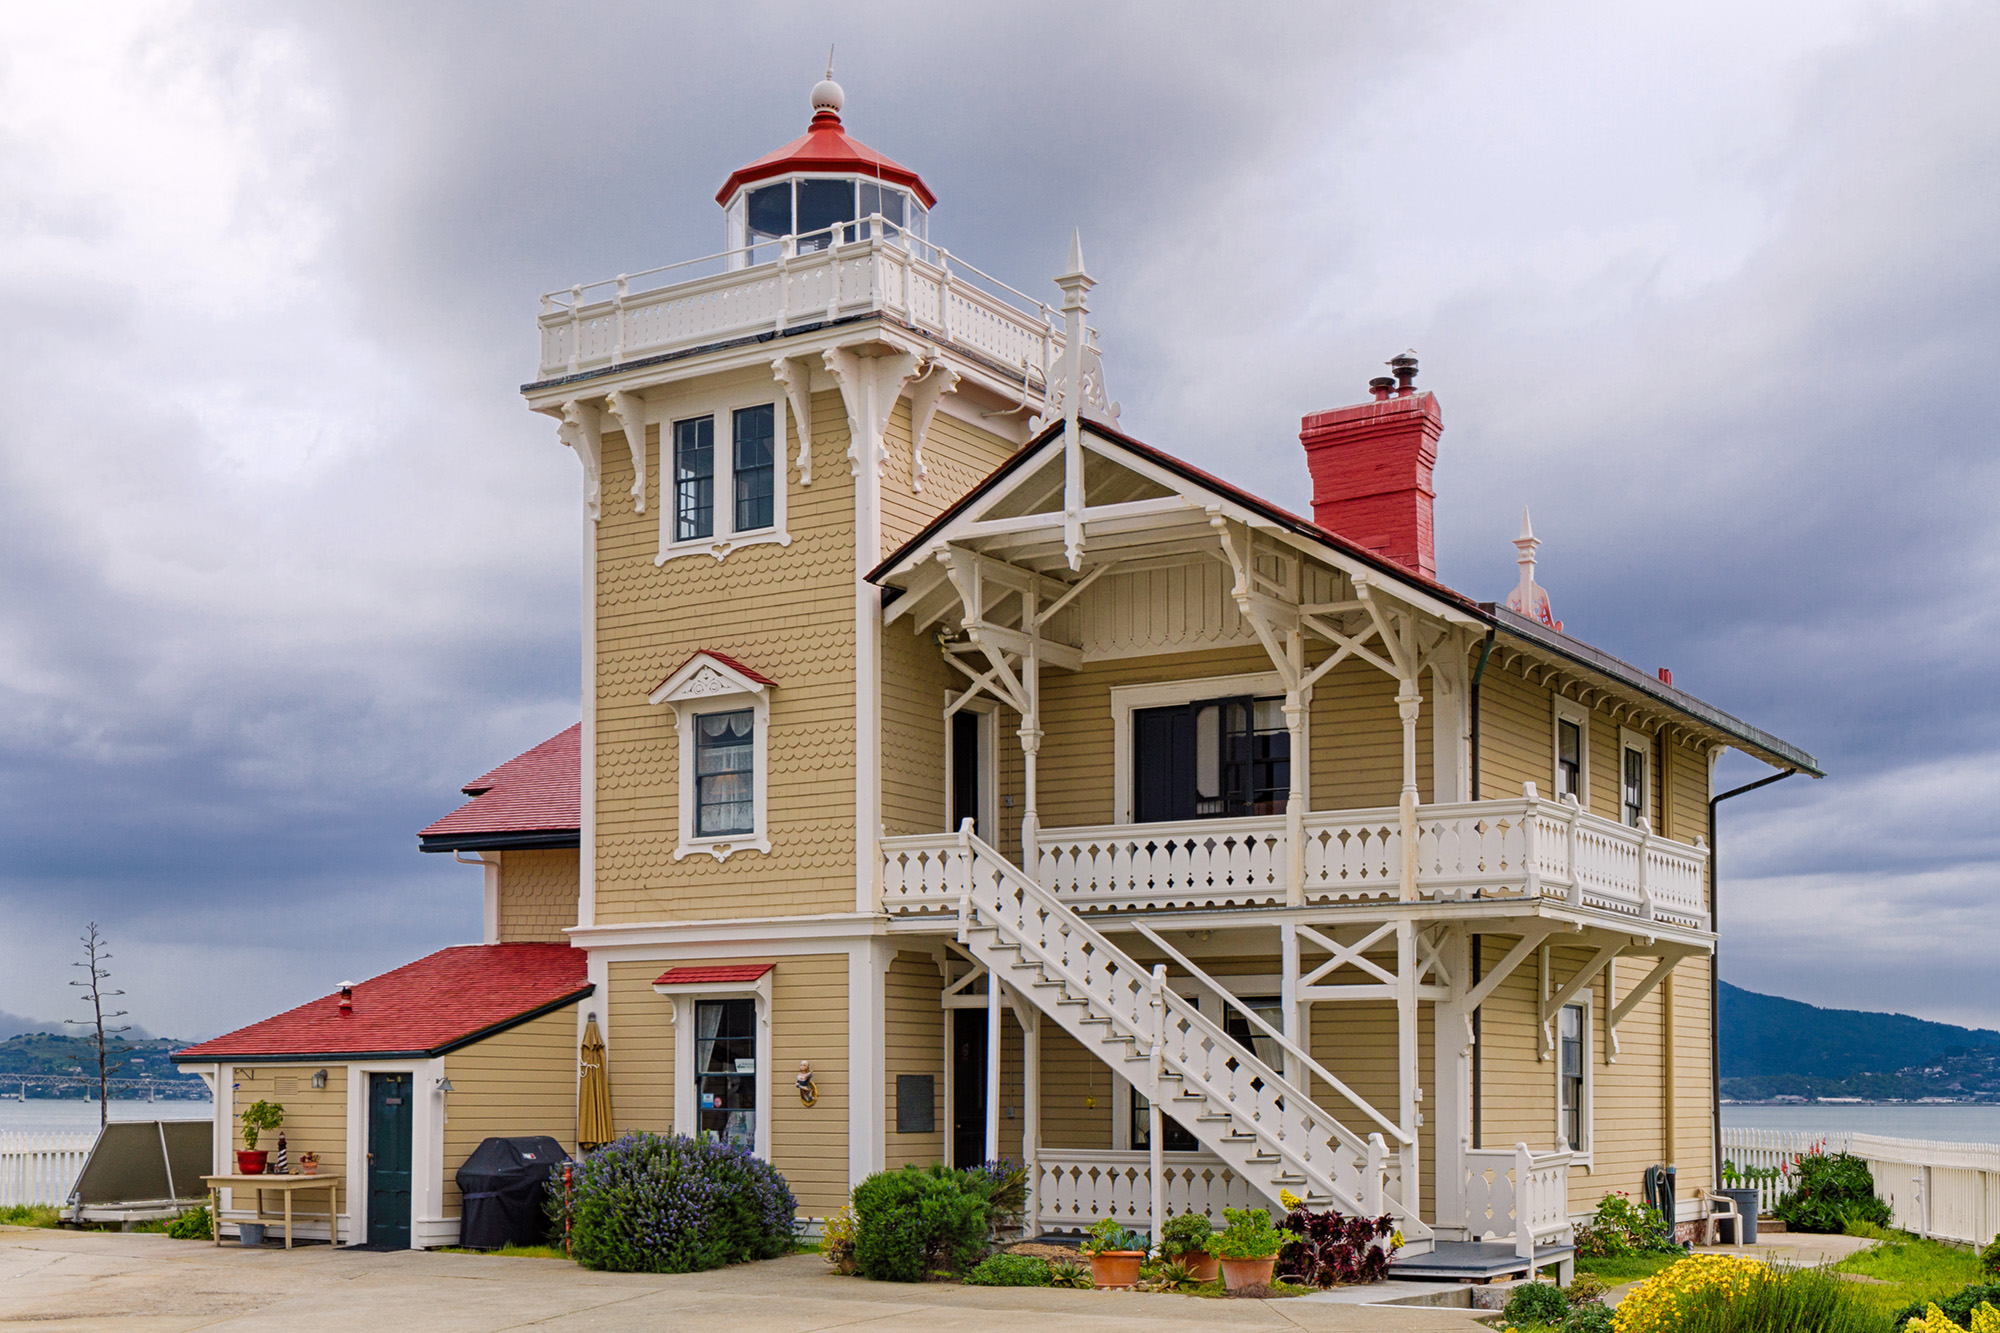 The Victorian East Brother Light Station sits on an island in the San Francisco Bay.